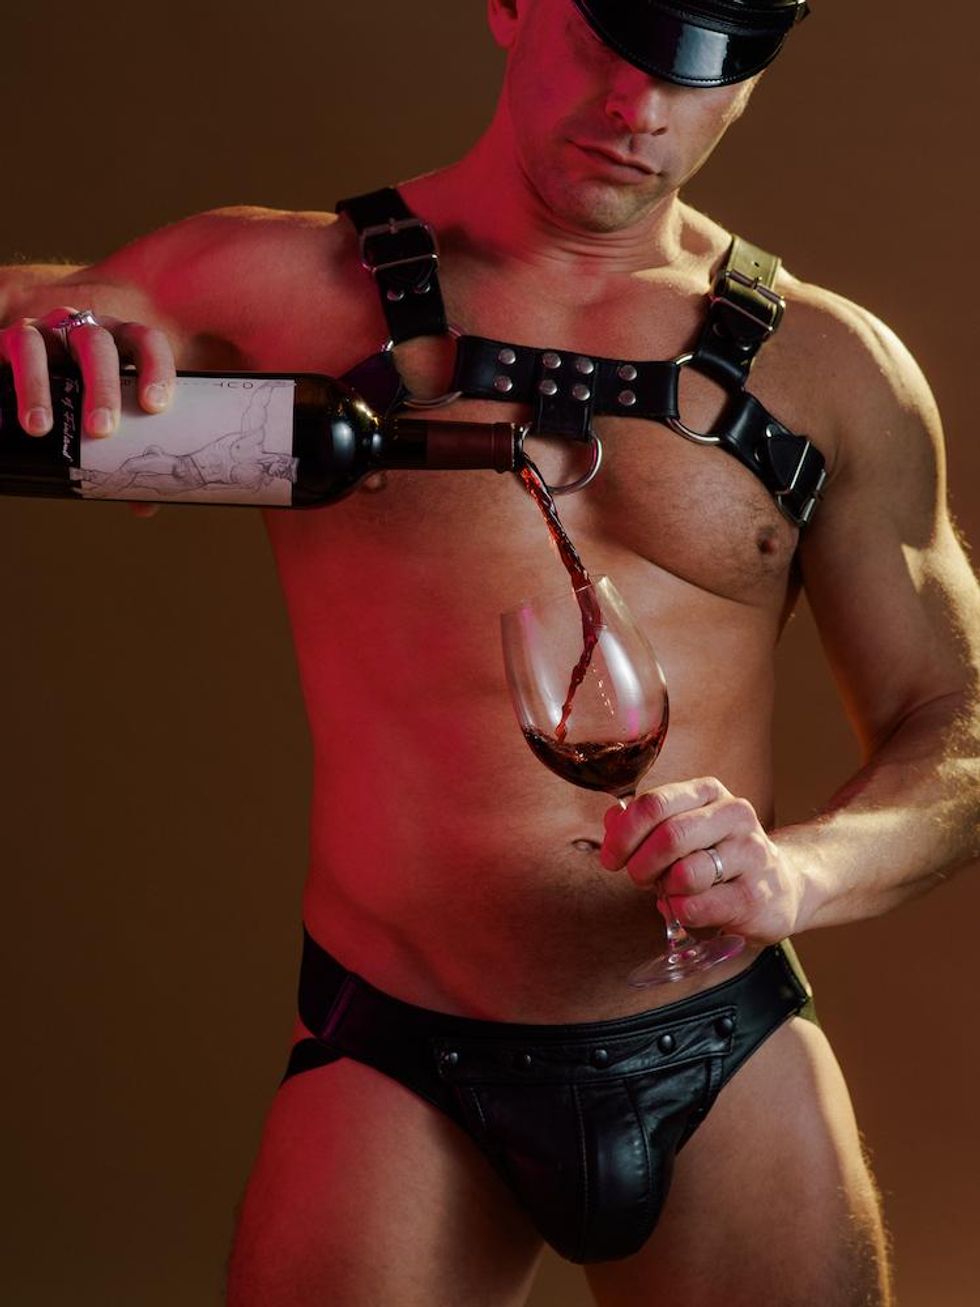 Tom of Finland Announces Wine Label With Leather-Clad Photoshoot